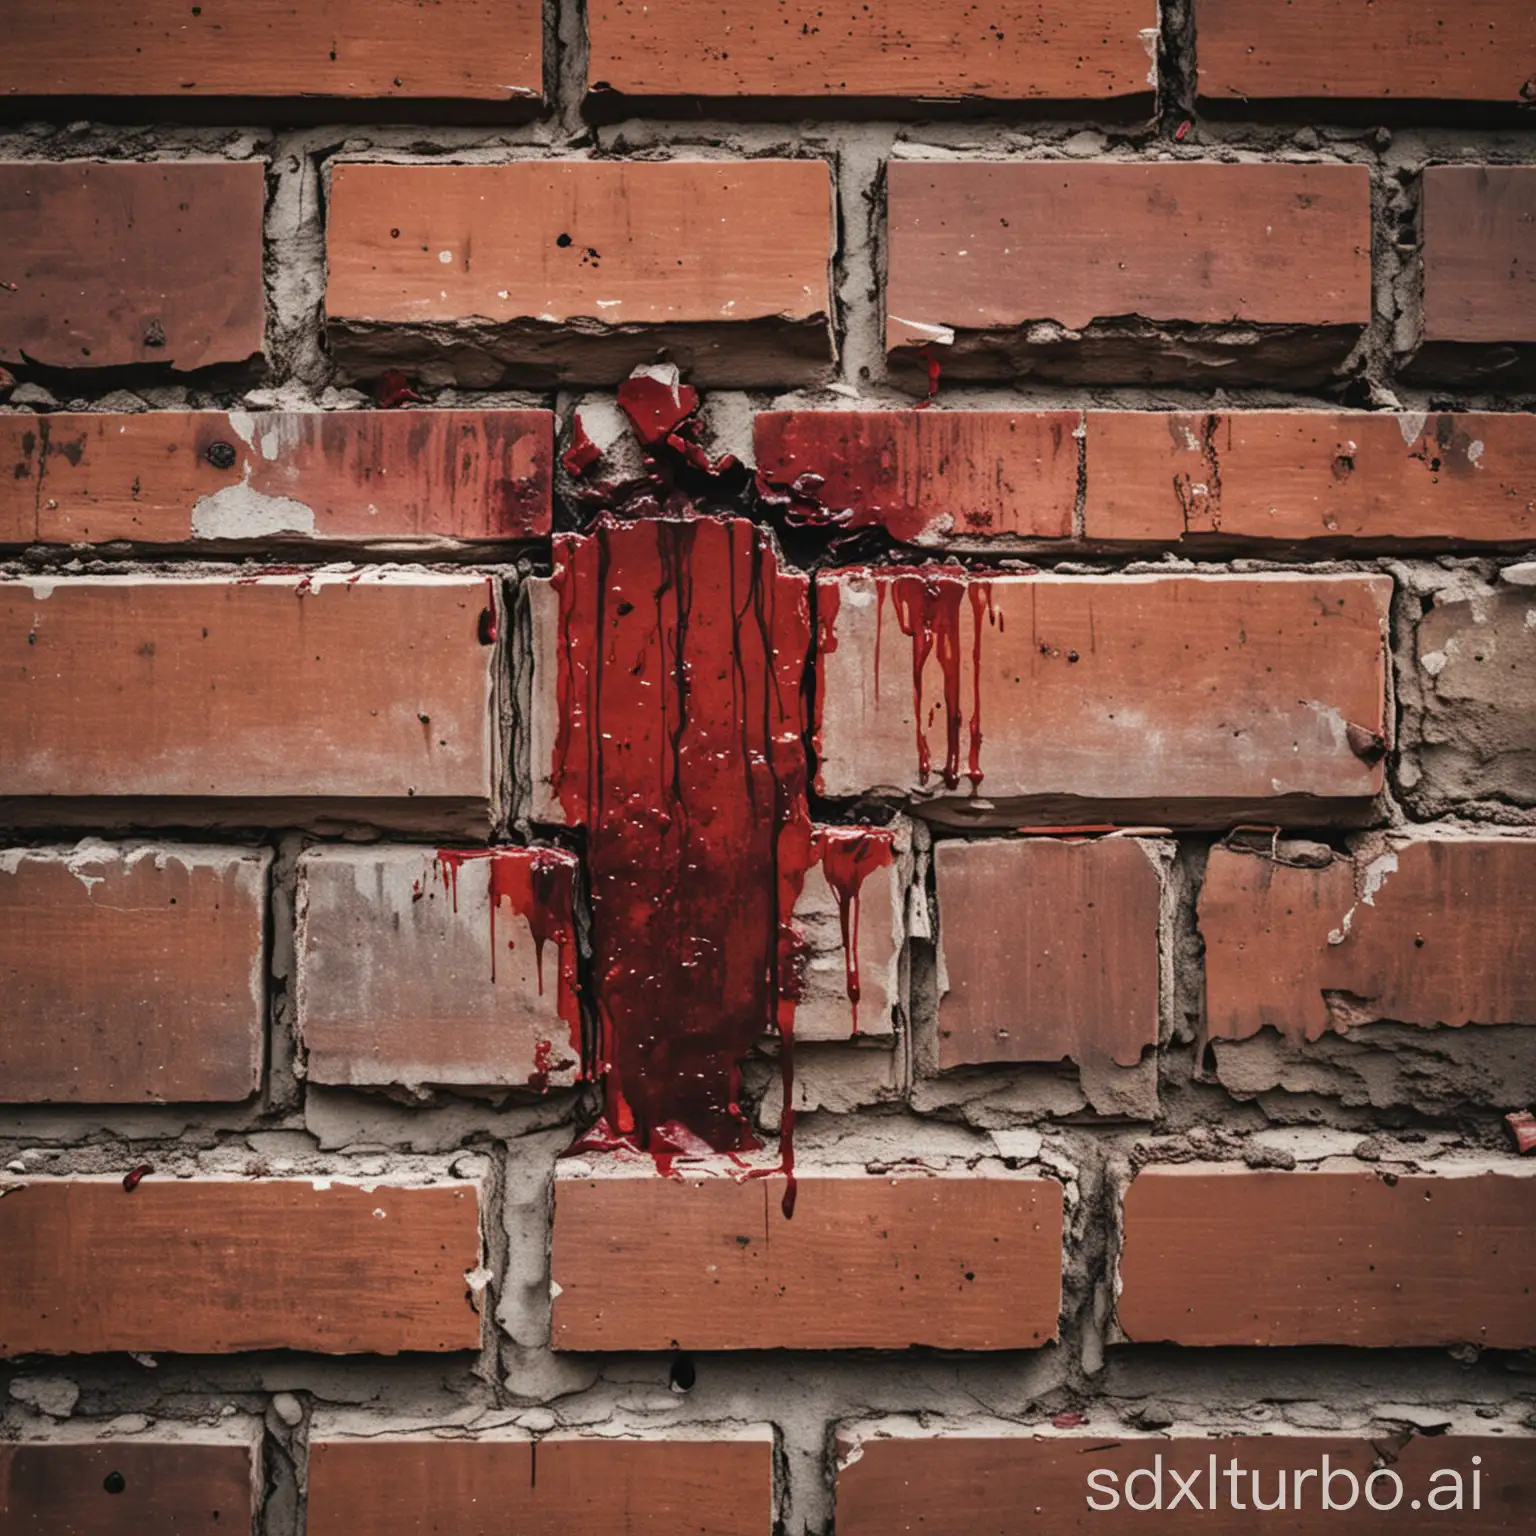 Brick-Stained-with-Blood-in-Dark-Alleyway